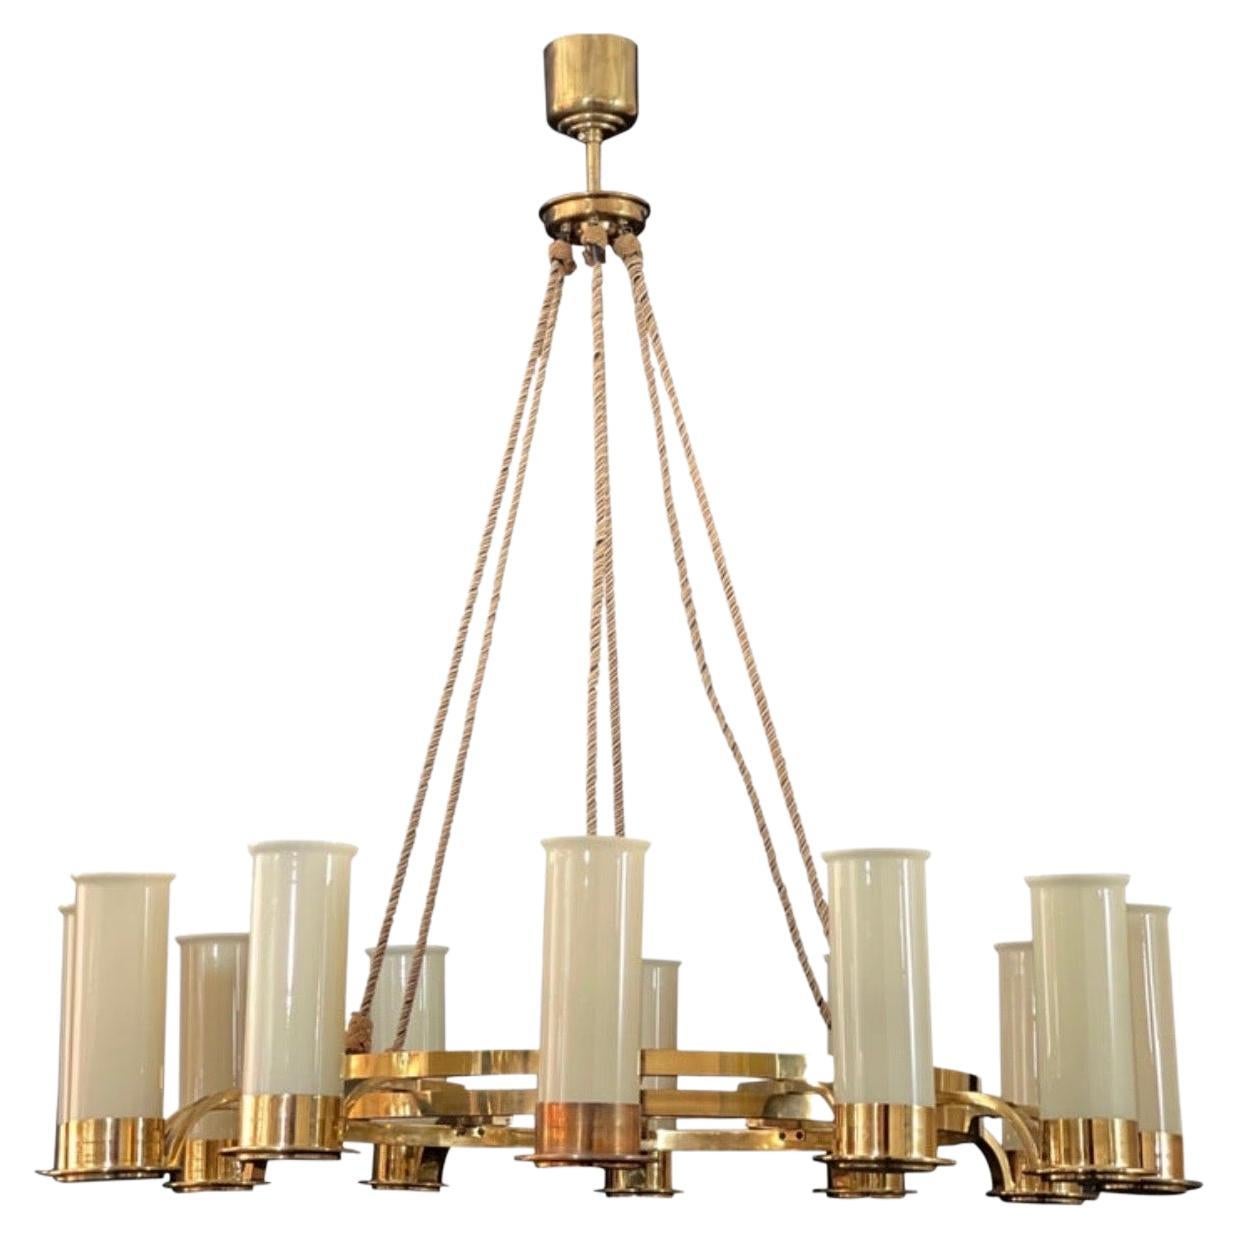 Pair of large customized Art Deco Style brass and glass chandeliers.
Socket: each 16 x E26 for US standards.
